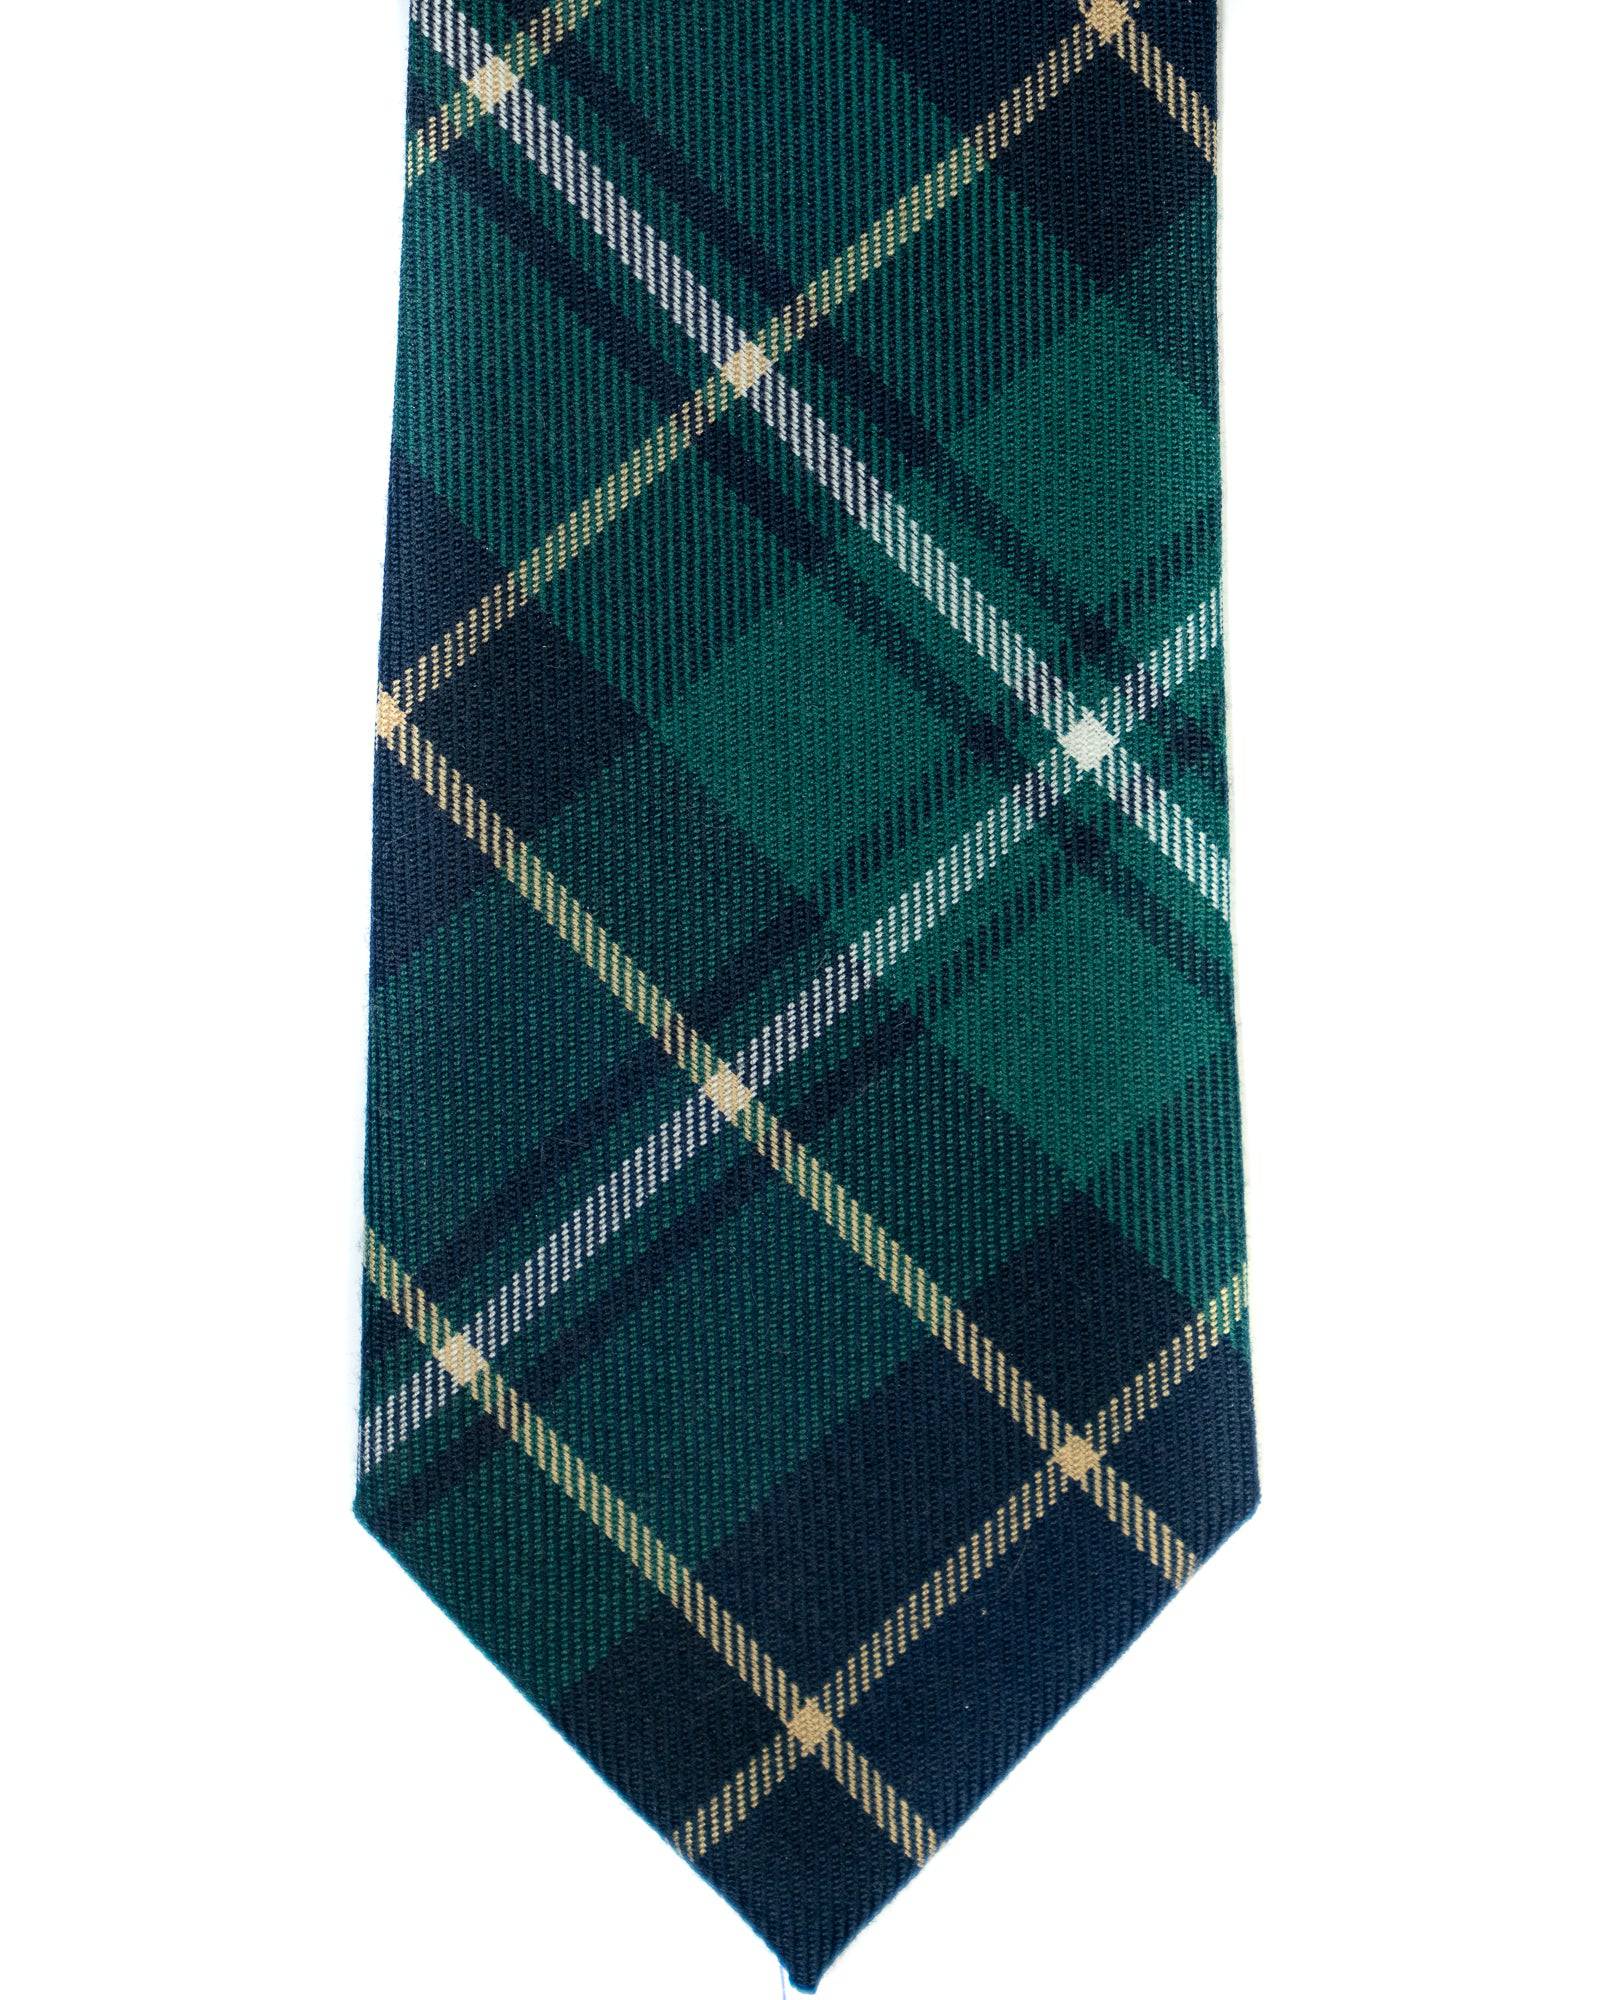 Silk And Wool Tie In Green And Navy Tartan Plaid - Rainwater's Men's Clothing and Tuxedo Rental